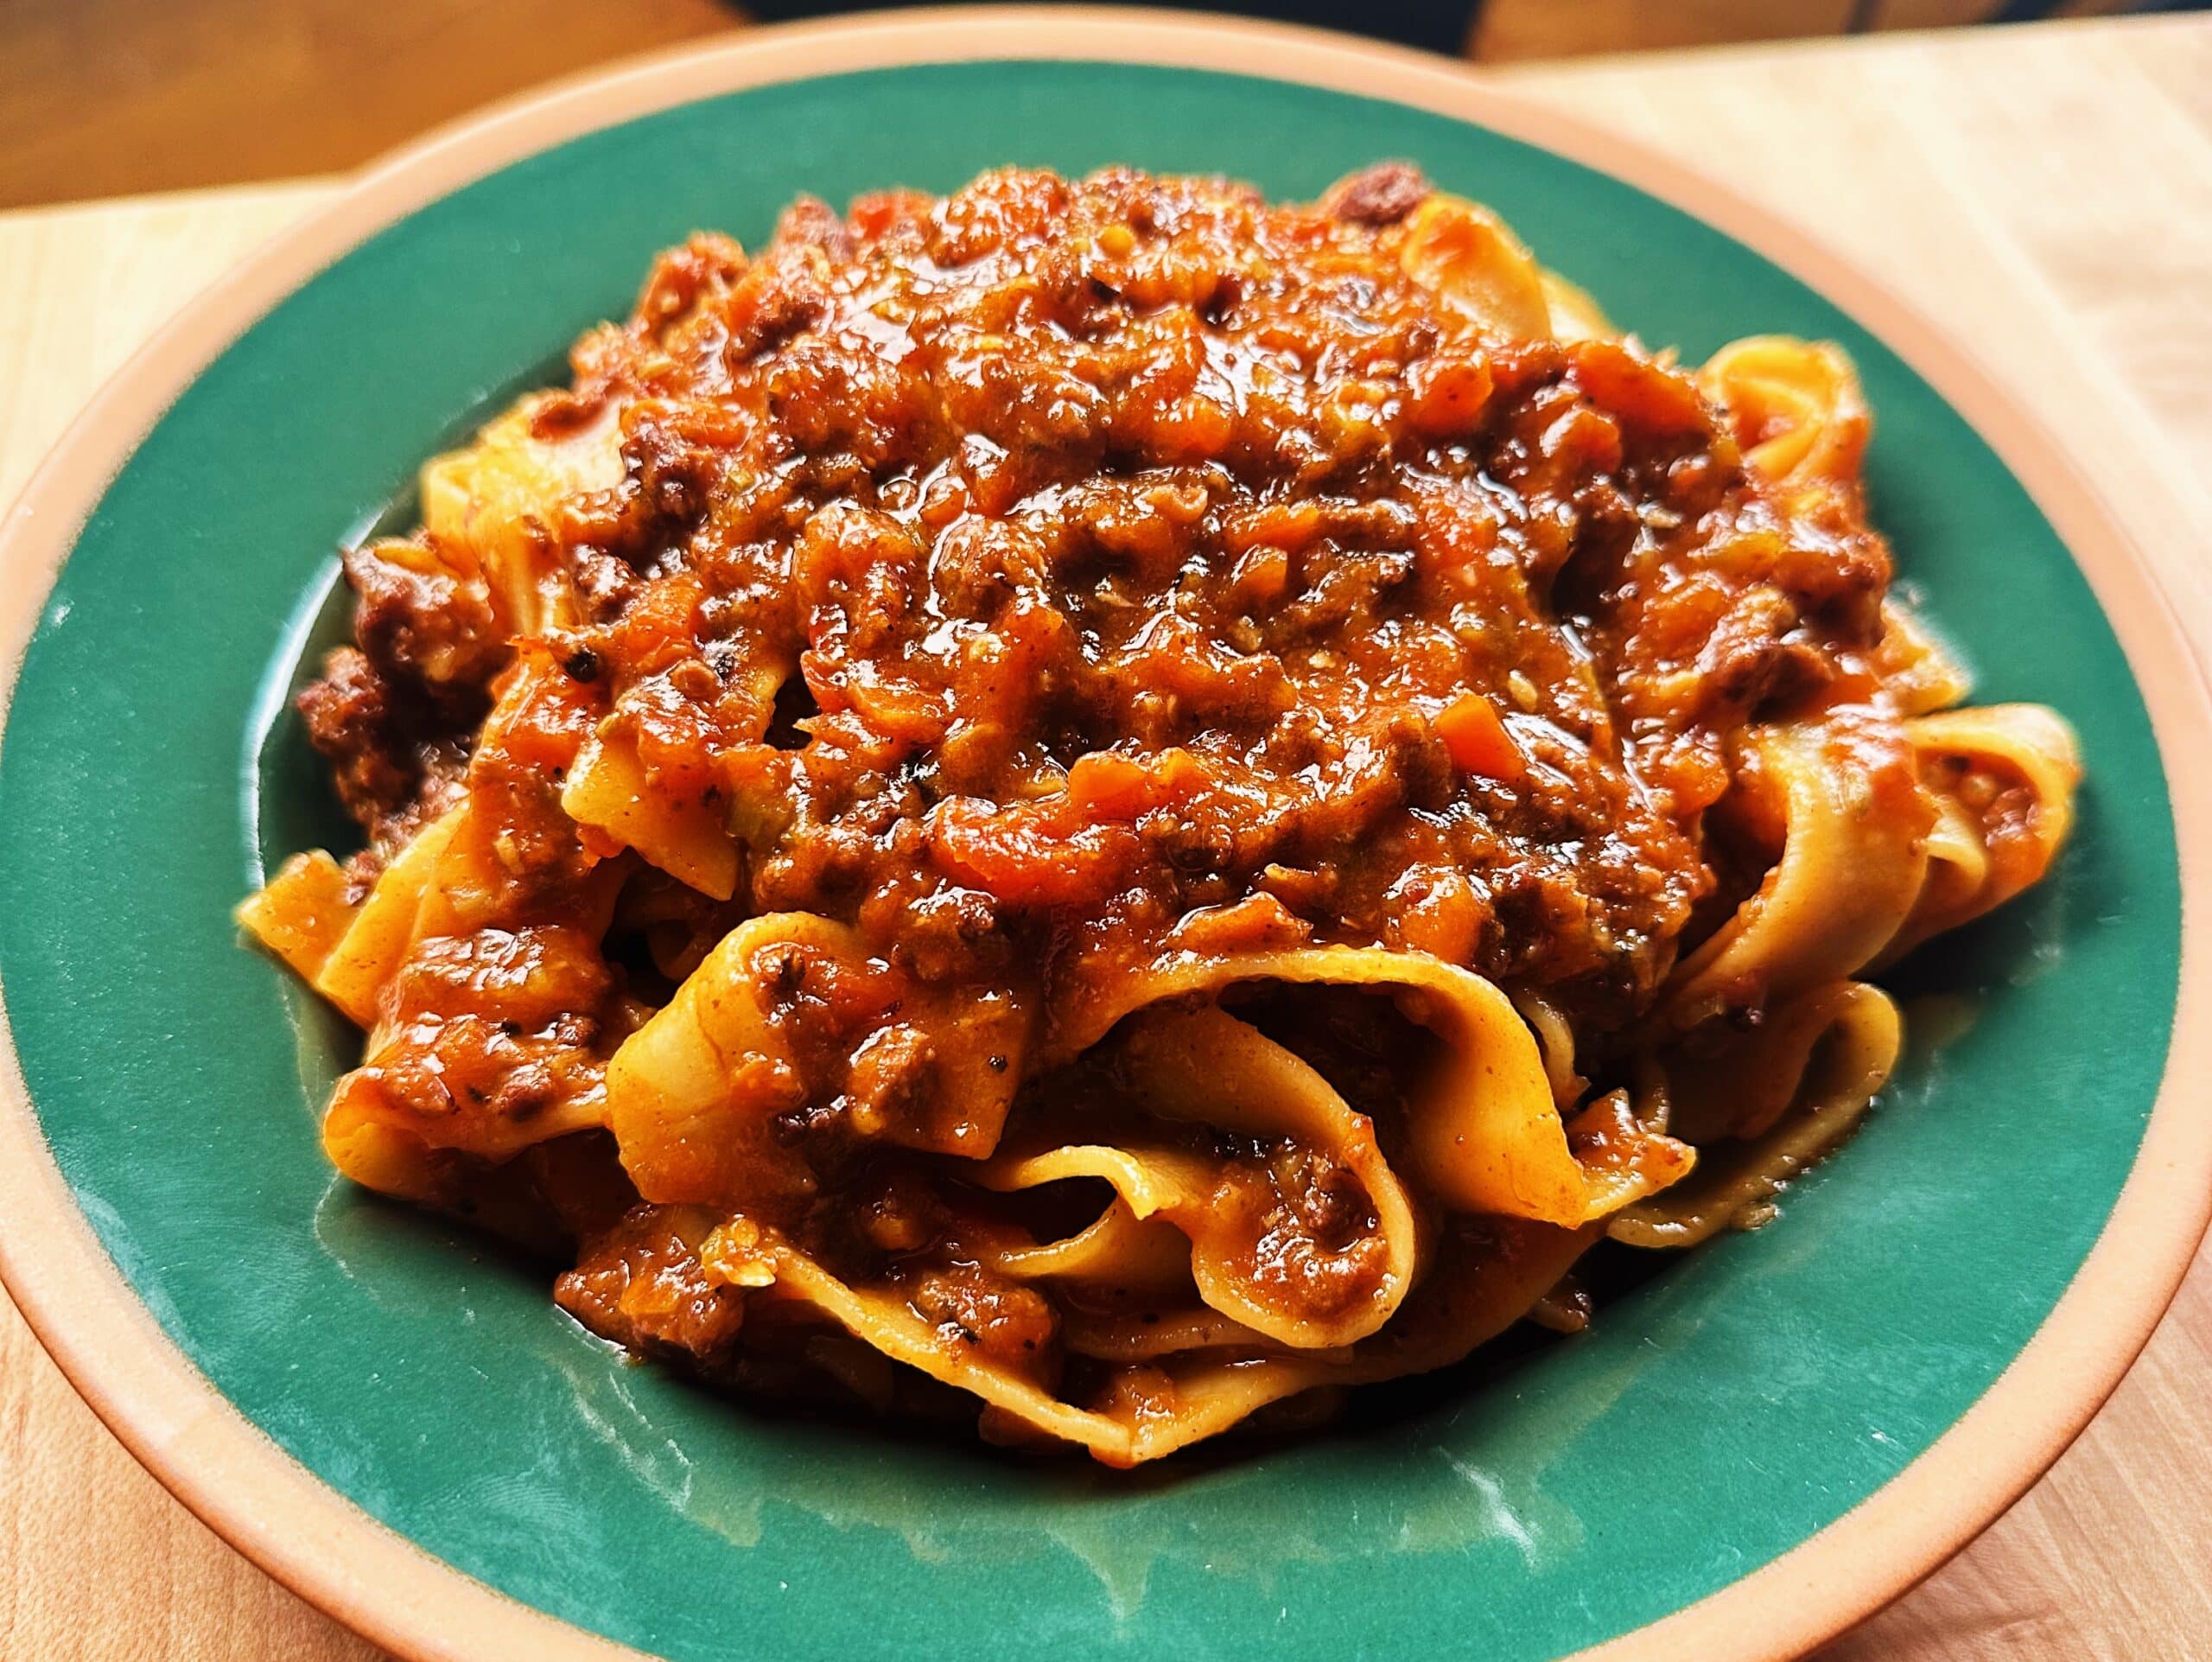 Spiced Beef Ragu with Pappardelle